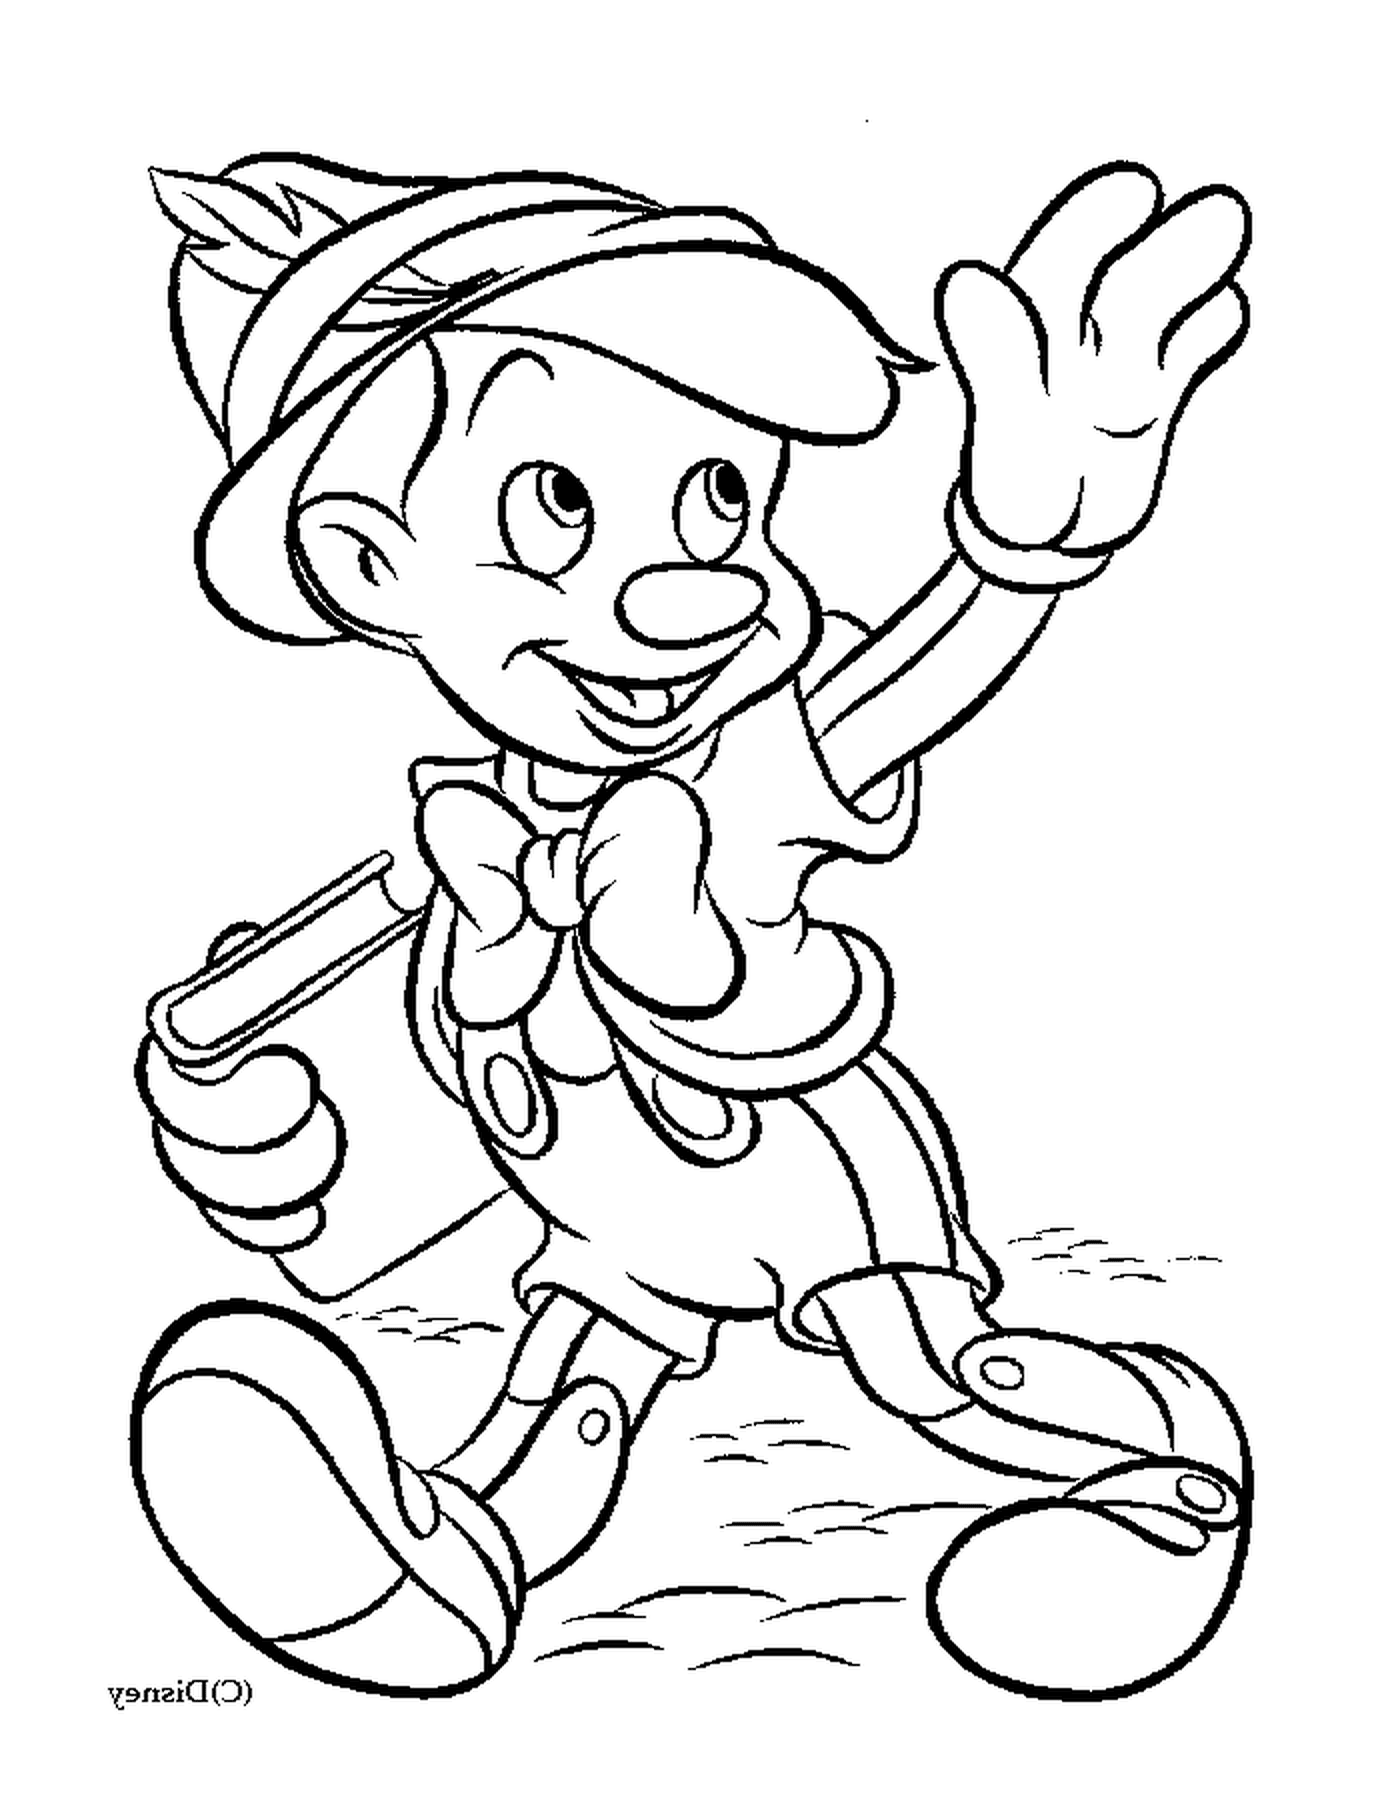  Pinocchio on the way to school 